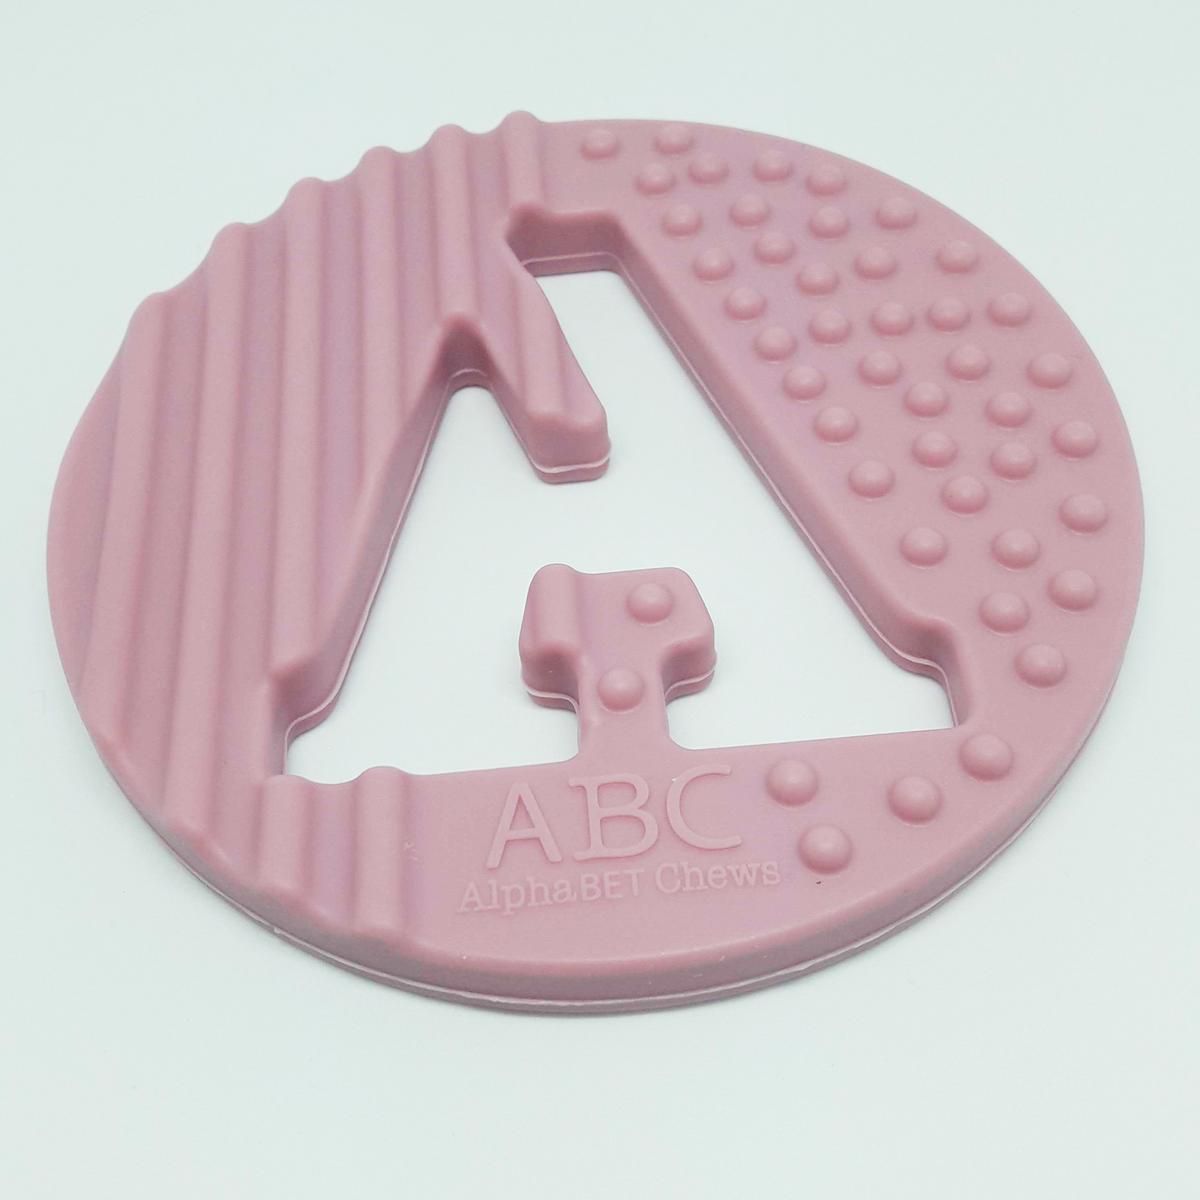 One.Chew.Three - Alphabet Chews Silicone Letter Teething Disc - A - Pink